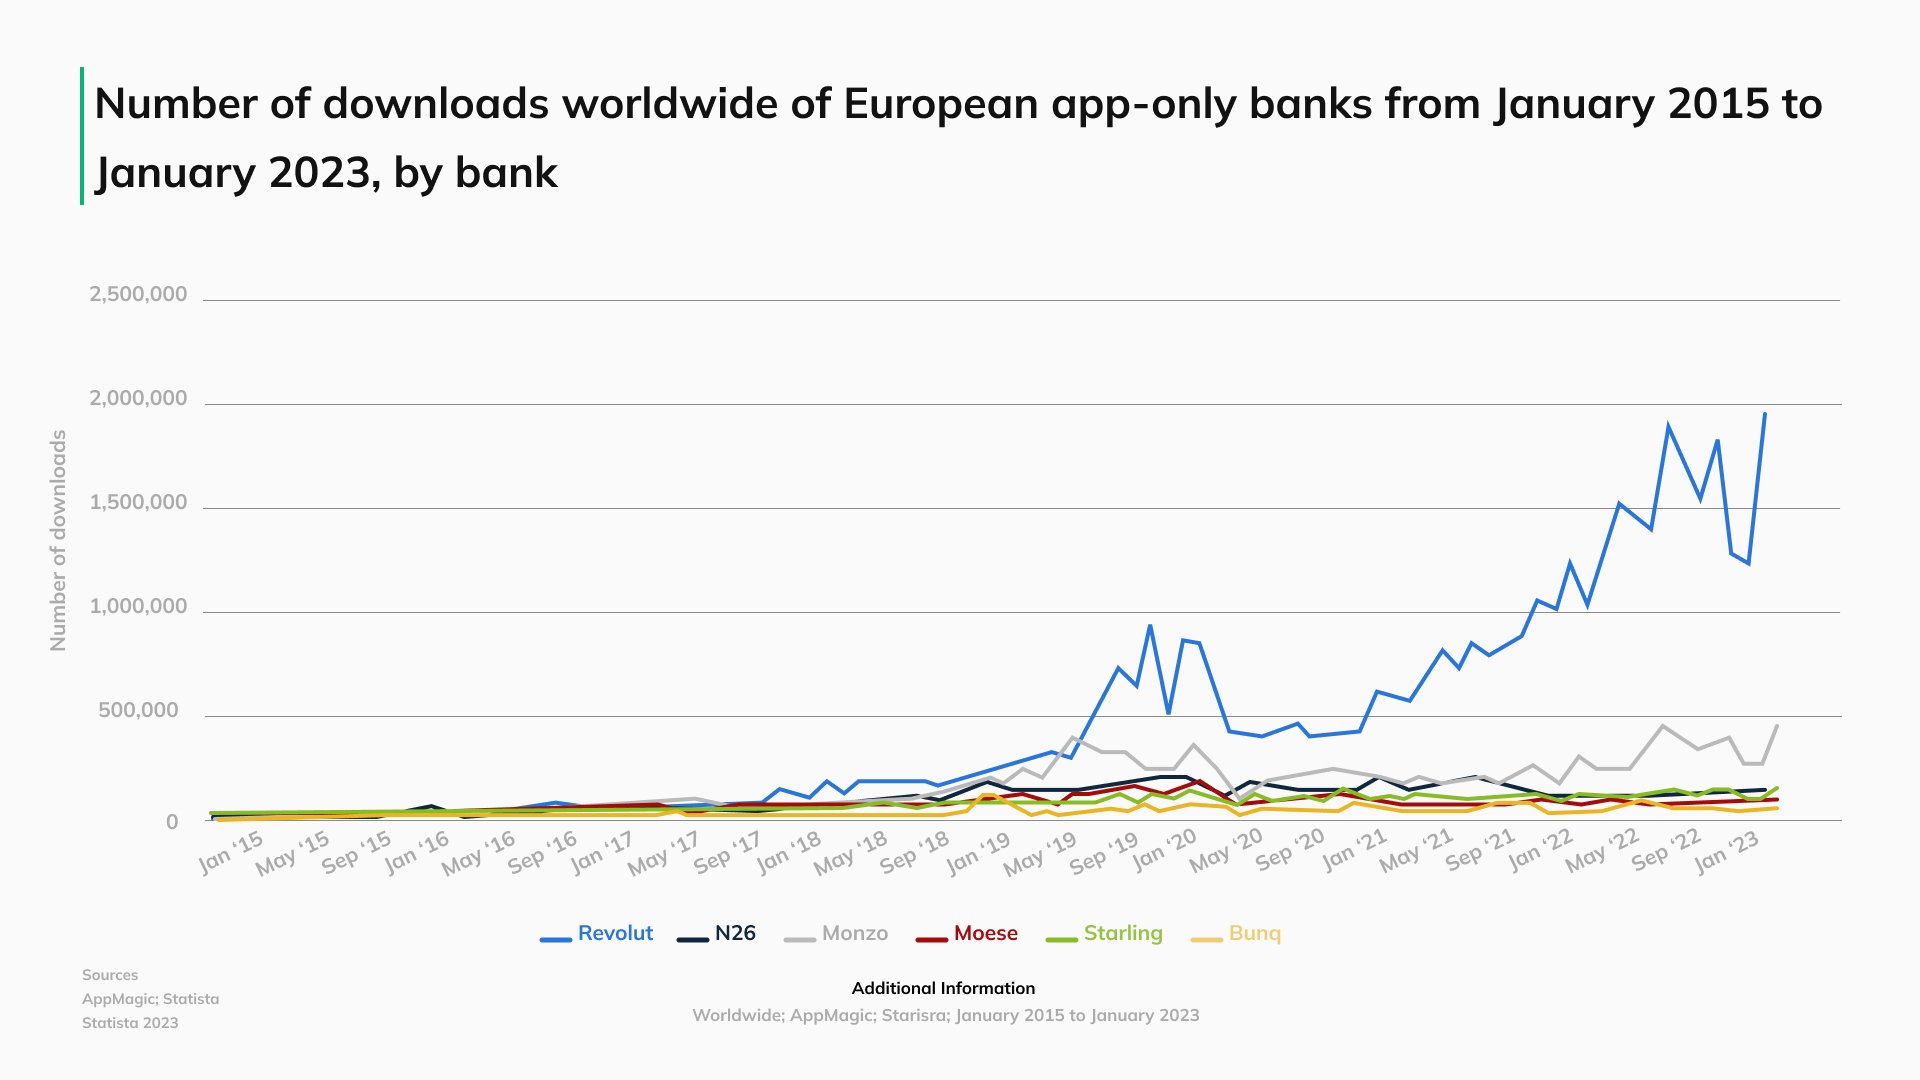 Banking apps - number of downloads 2015-2023 chart